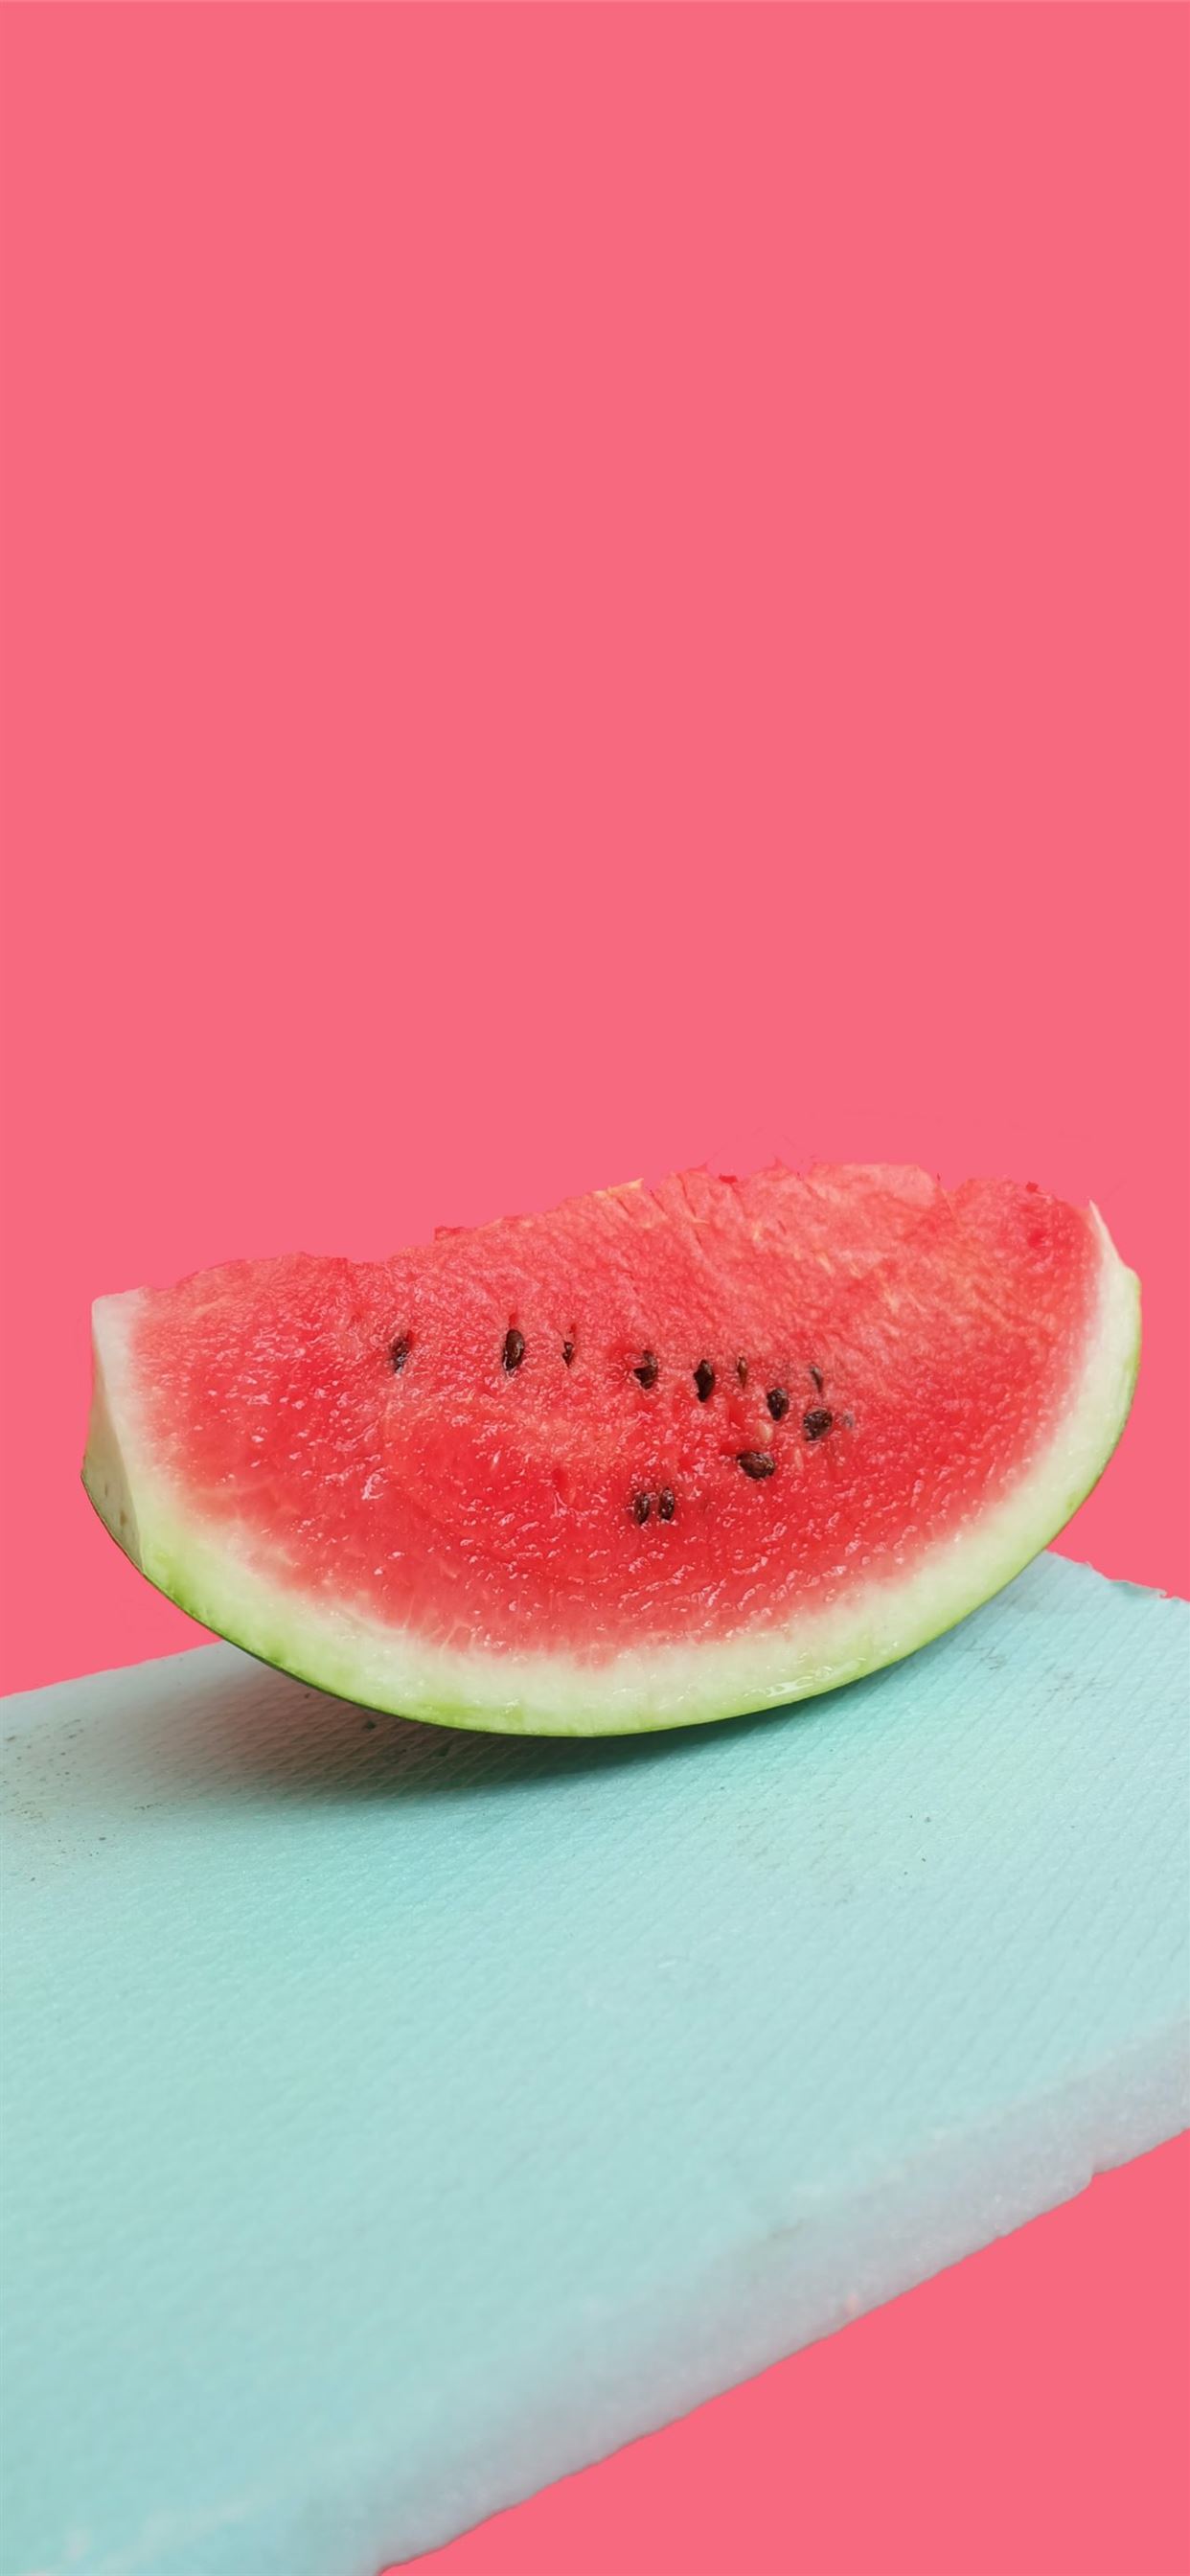 Download Let Summer into Your Life with the Watermelon Iphone Wallpaper   Wallpaperscom